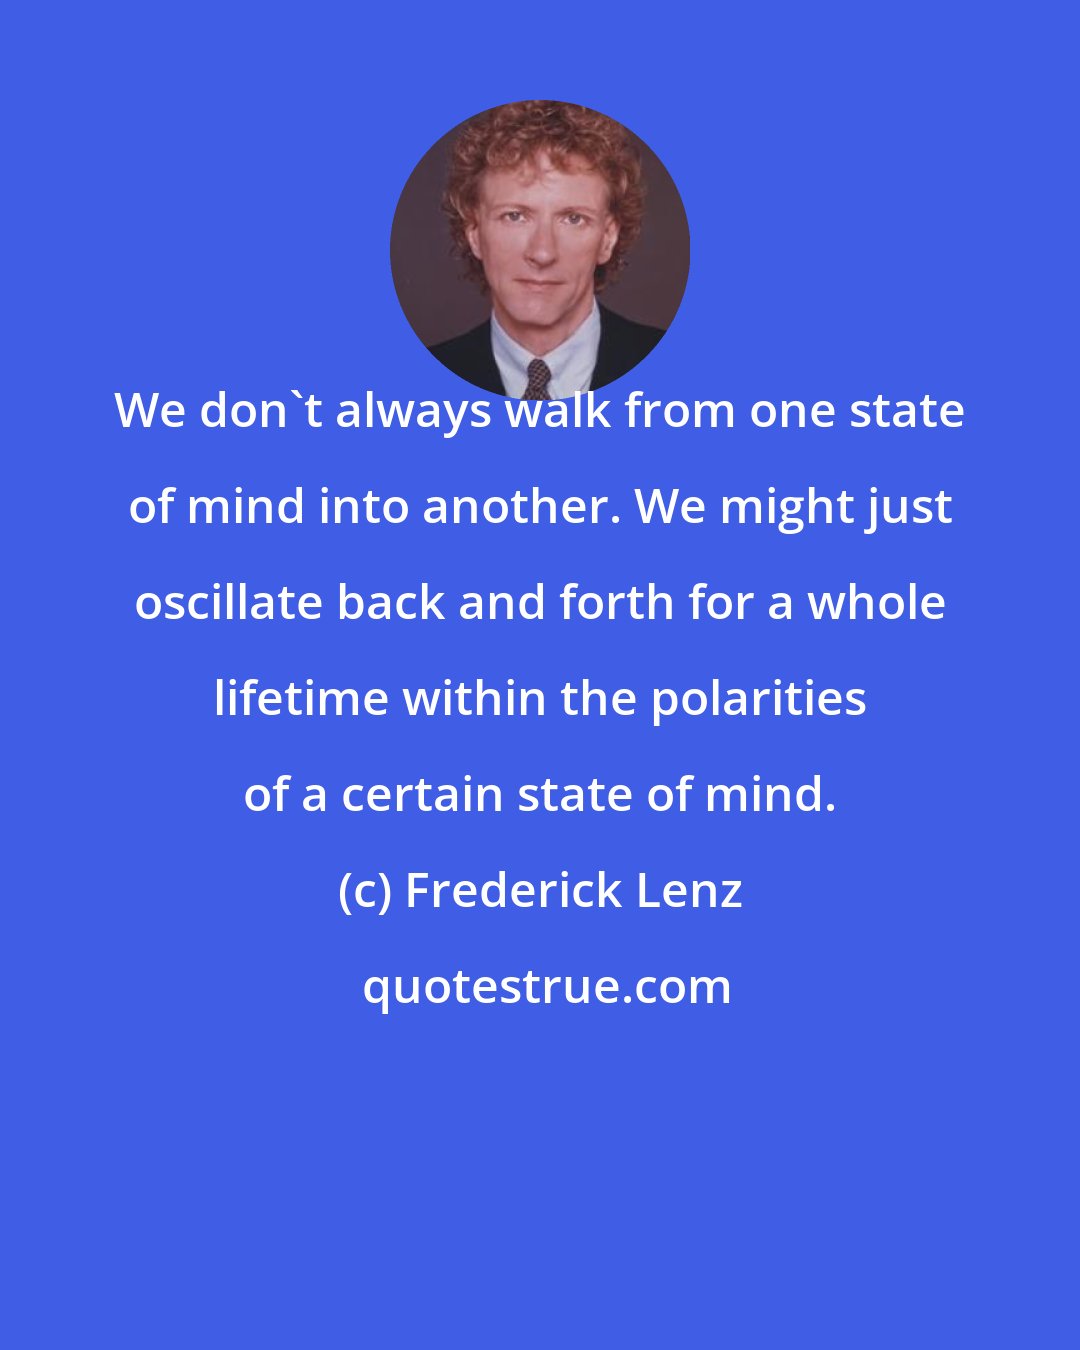 Frederick Lenz: We don't always walk from one state of mind into another. We might just oscillate back and forth for a whole lifetime within the polarities of a certain state of mind.